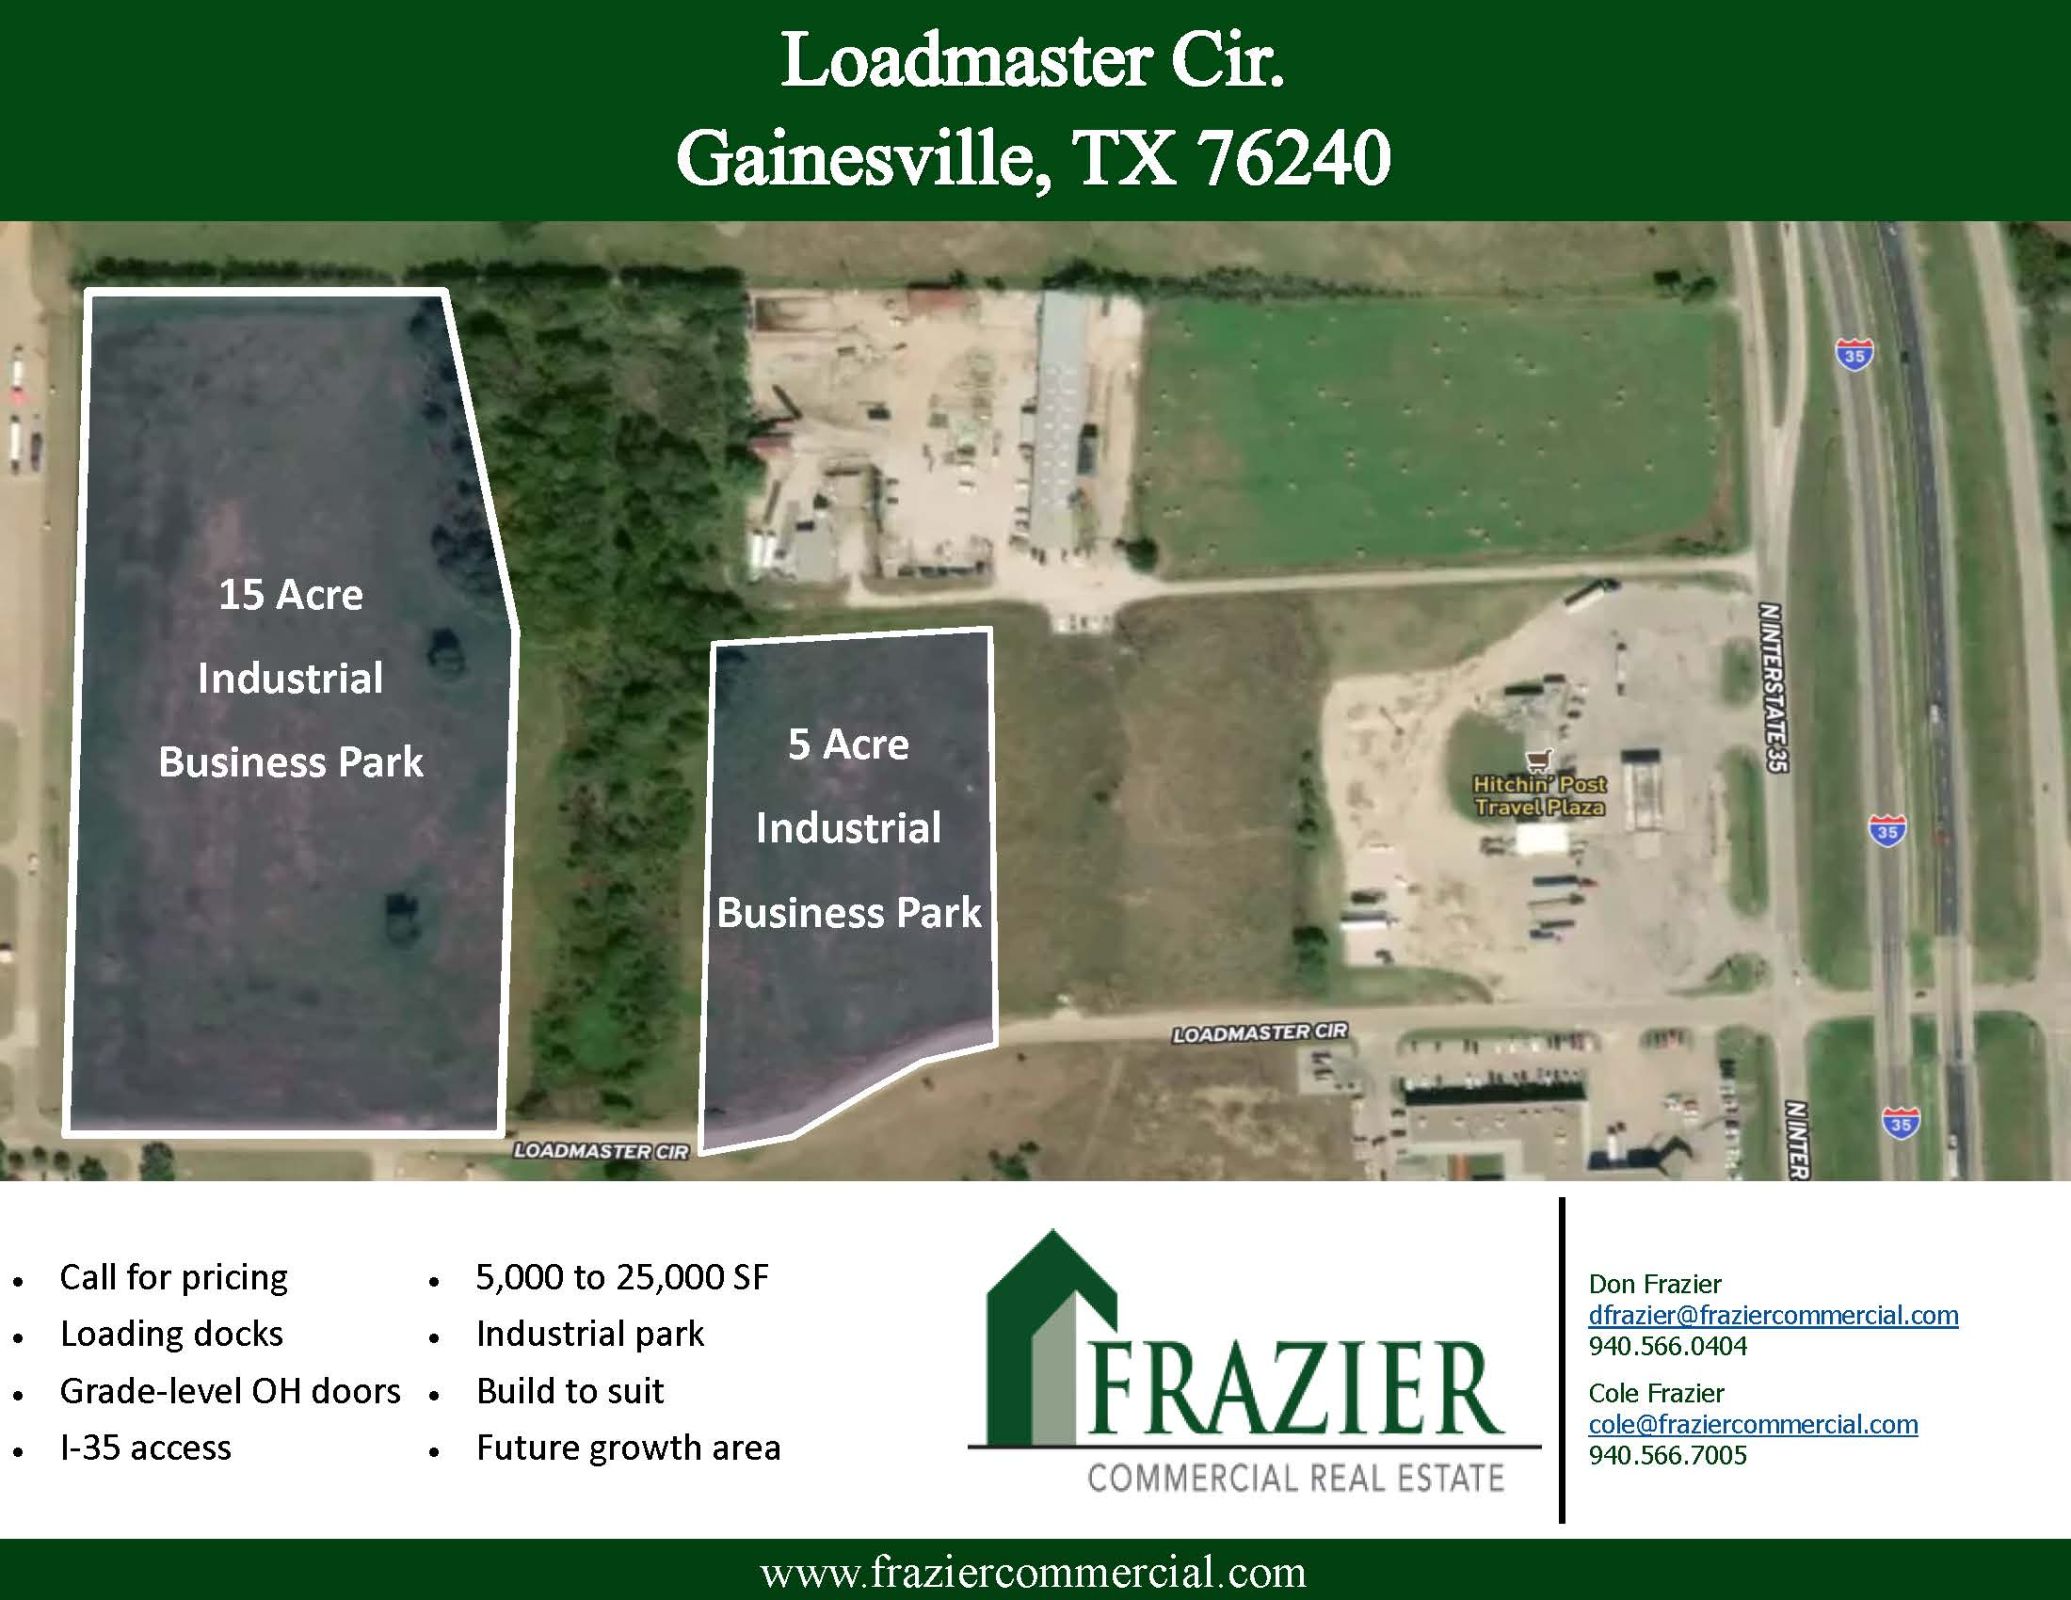 Main Photo For 14.819 Acre Build to Suit Industrial Business Park - Corporate Square Industrial Park - W Loadmaster Cir